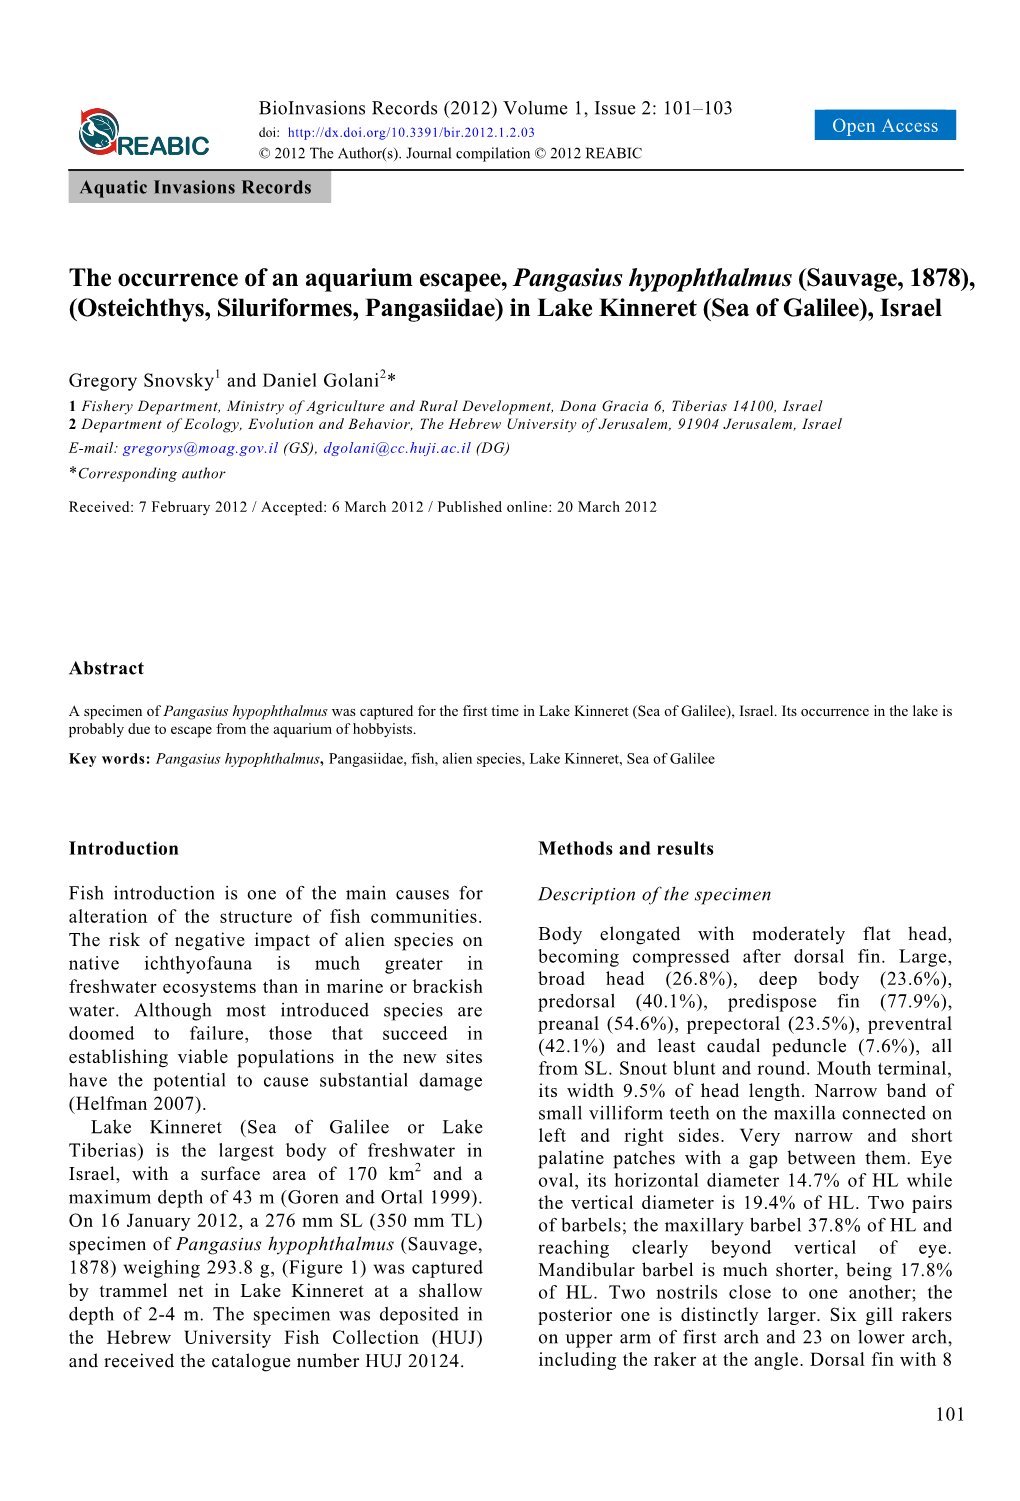 The Occurrence of an Aquarium Escapee, Pangasius Hypophthalmus (Sauvage, 1878), (Osteichthys, Siluriformes, Pangasiidae) in Lake Kinneret (Sea of Galilee), Israel